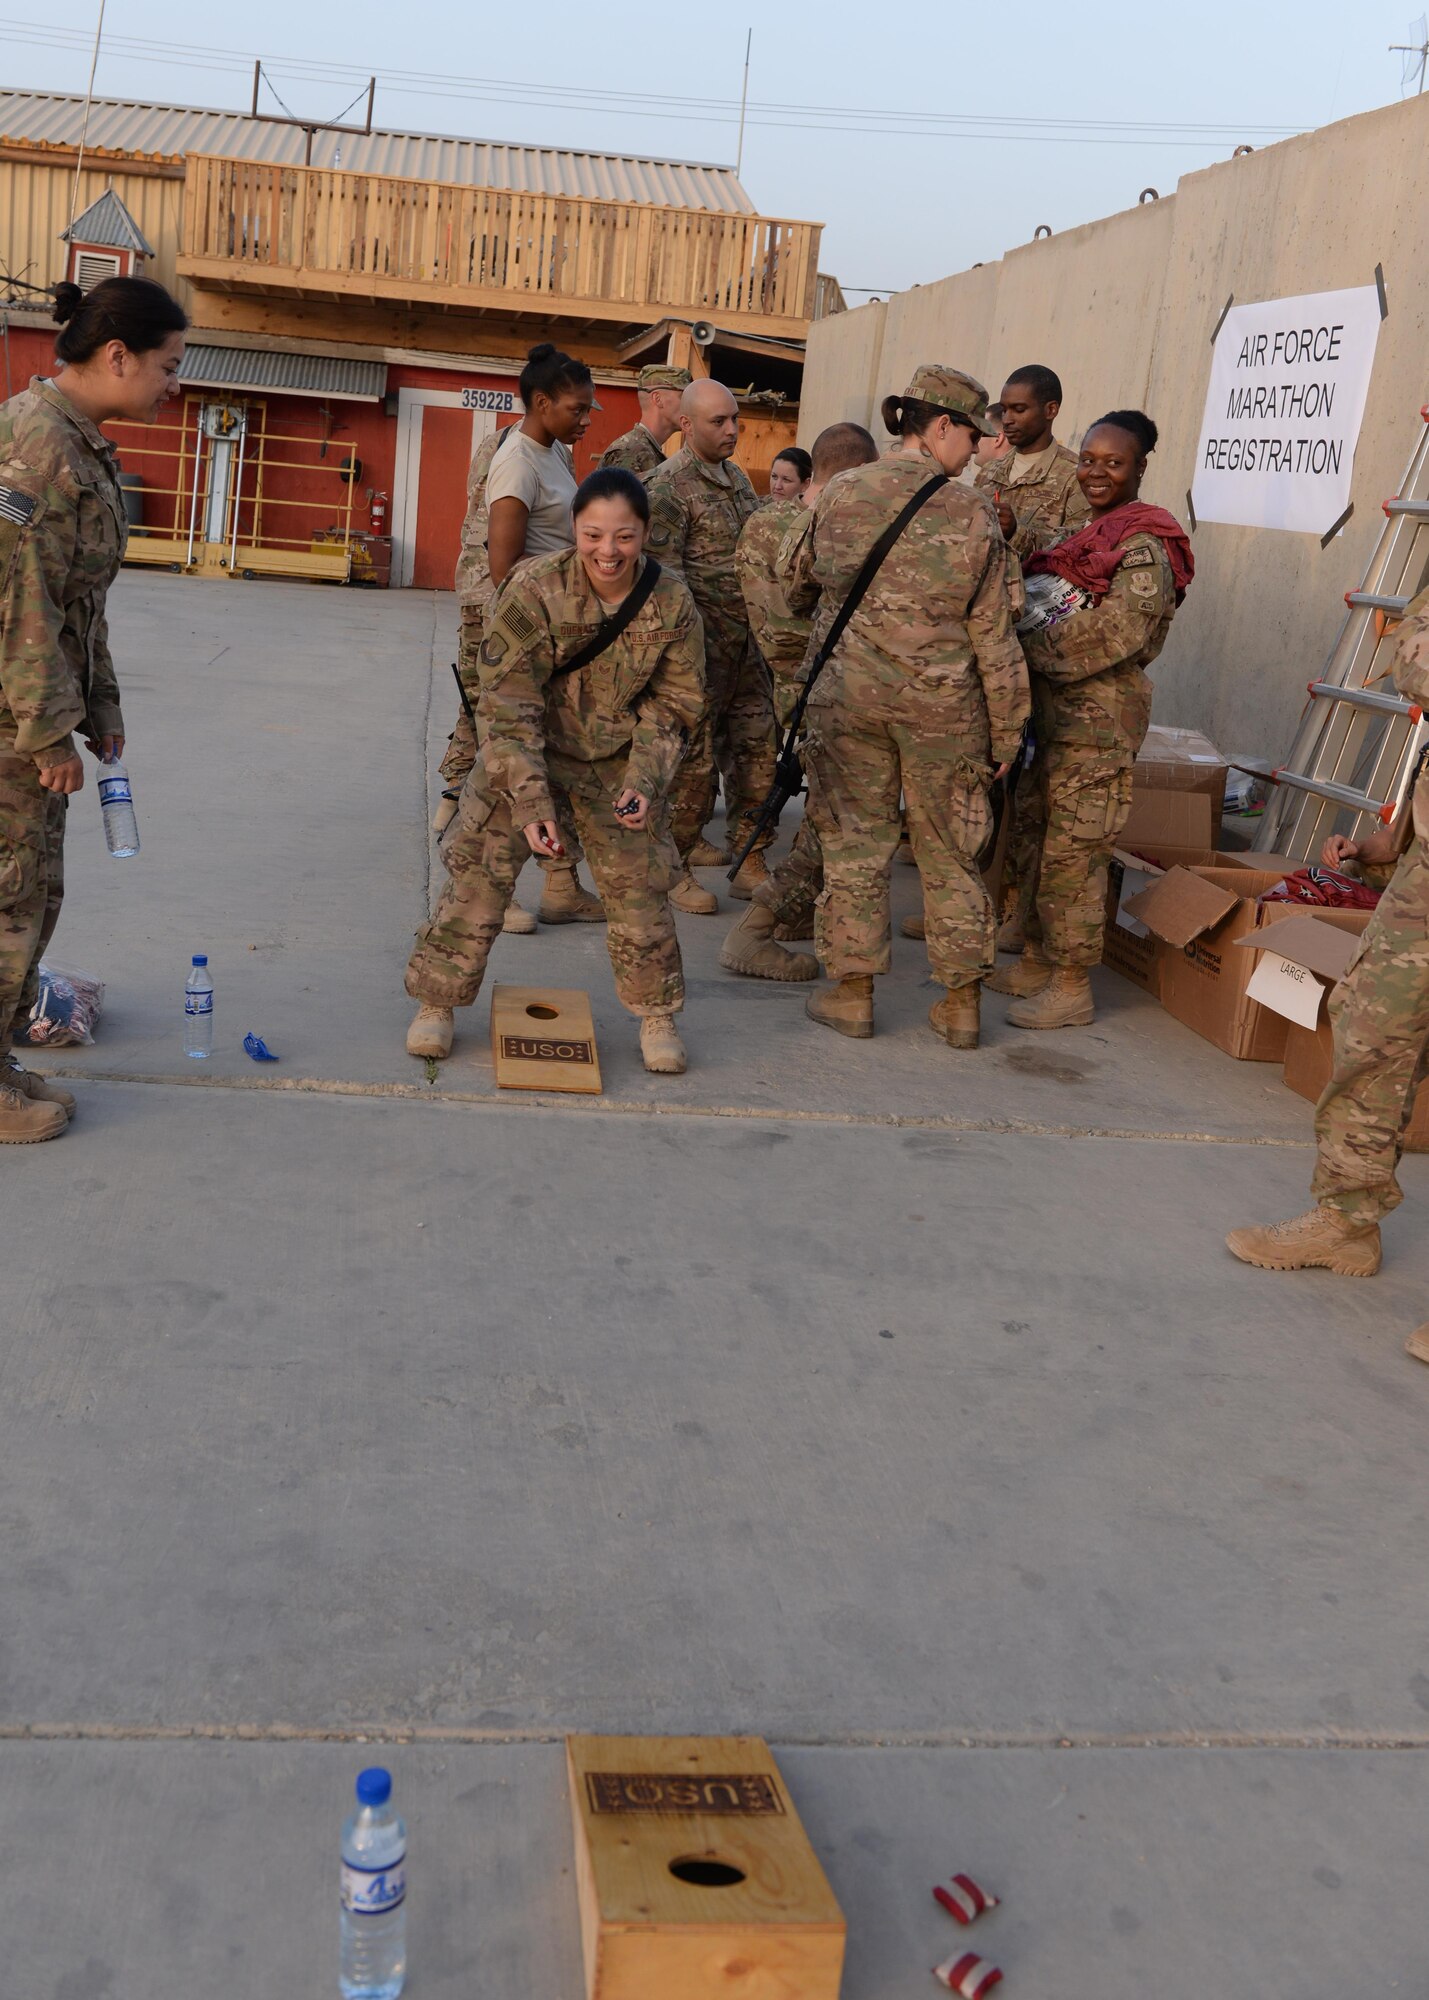 U.S. Airmen assigned to the 455th Air Expeditionary Wing participate in a game of corn hole during an Air Force birthday celebration Sept. 18, 2015, at Bagram Airfield, Afghanistan. The celebration which was hosted by the Armed Forces Committed to Excellence council, the 455th Force Support Squadron and other private organizations featured games, food and an Air Force tradition cake cutting ceremony. (U.S. Air Force photo by Senior Airman Cierra Presentado/Released)